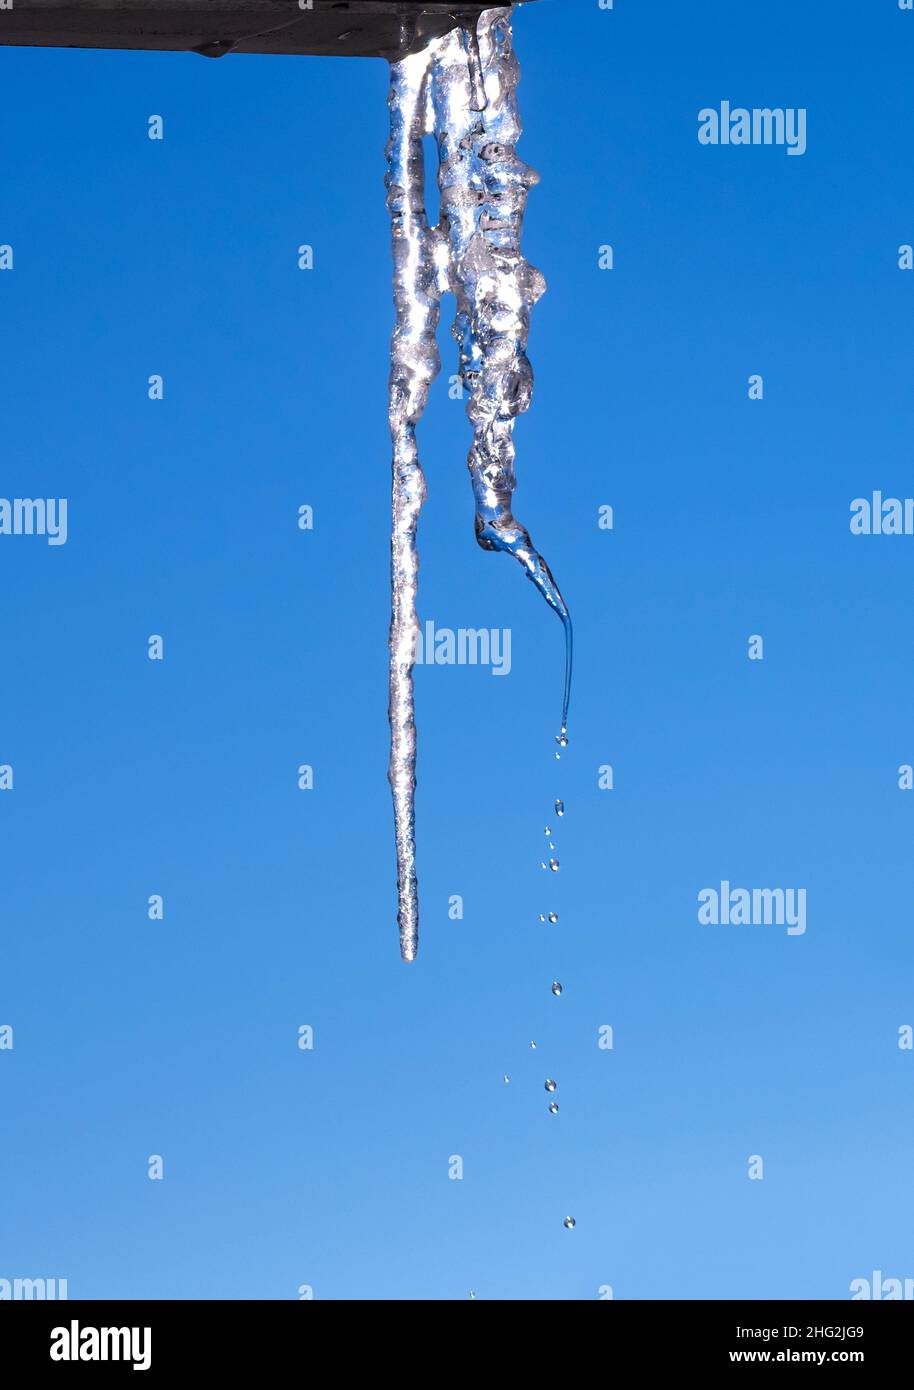 Icicles melting, dripping water drops on a clear sunny winter day. Stock Photo